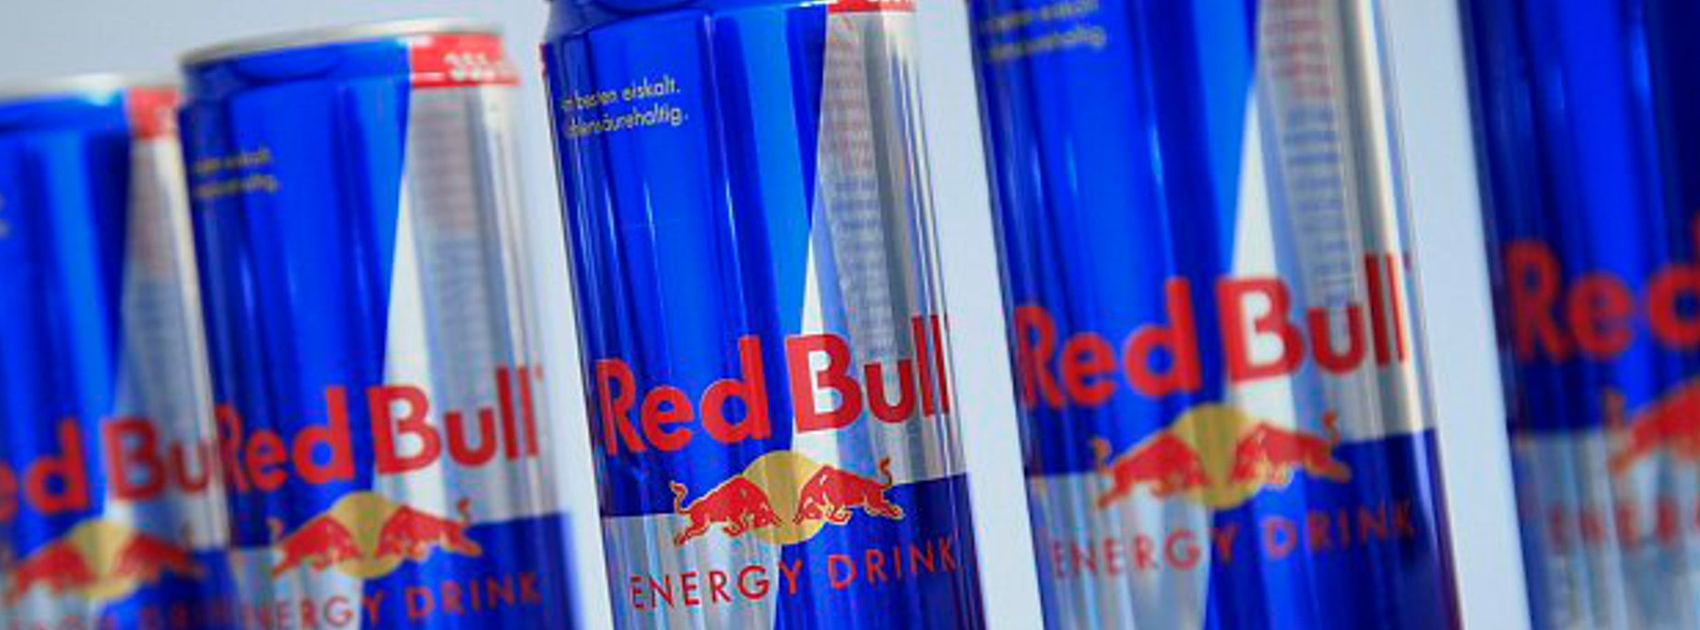 Red Bull Unknown Facts,Famous Energy Drink Red Bull Facts, Red Bull History and Facts, Red Bull Latest News,Inspiring Facts about Red Bull, Interesting Facts 2019, Most Interesting Facts,startup stories, Surprising Facts About Red Bull, Red Bull Amazing Facts, Red Bull Facts, Red Bull Facts 2019, Red Bull Success Story